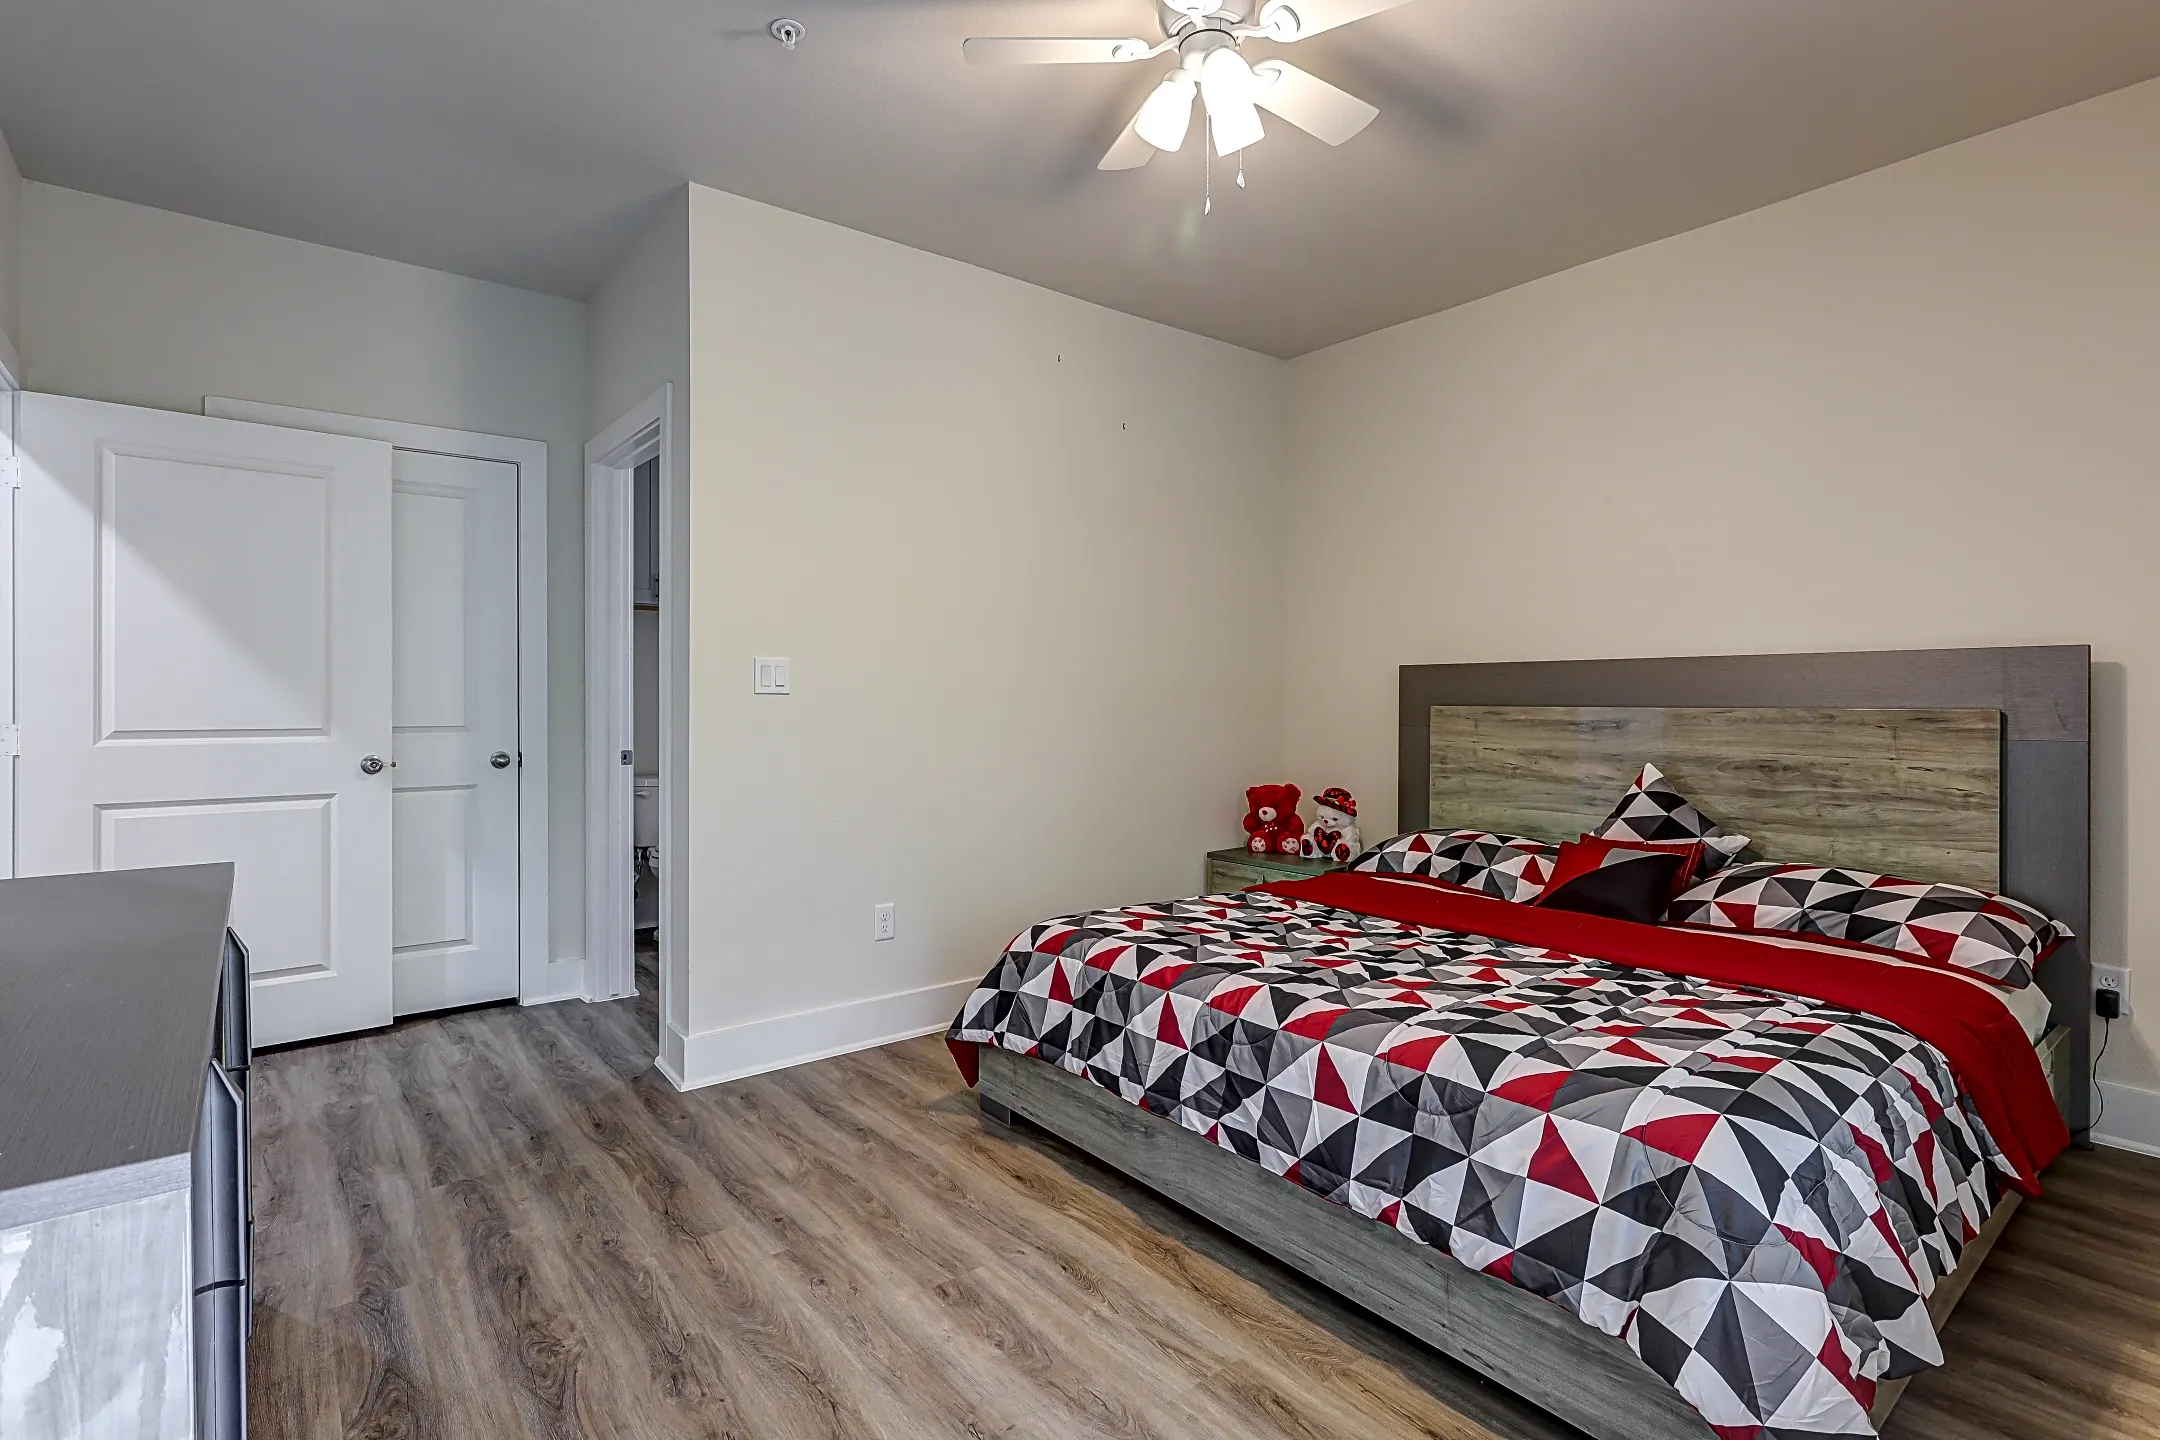 Bedroom - Azul Apartments - The Woodlands - Spring, TX